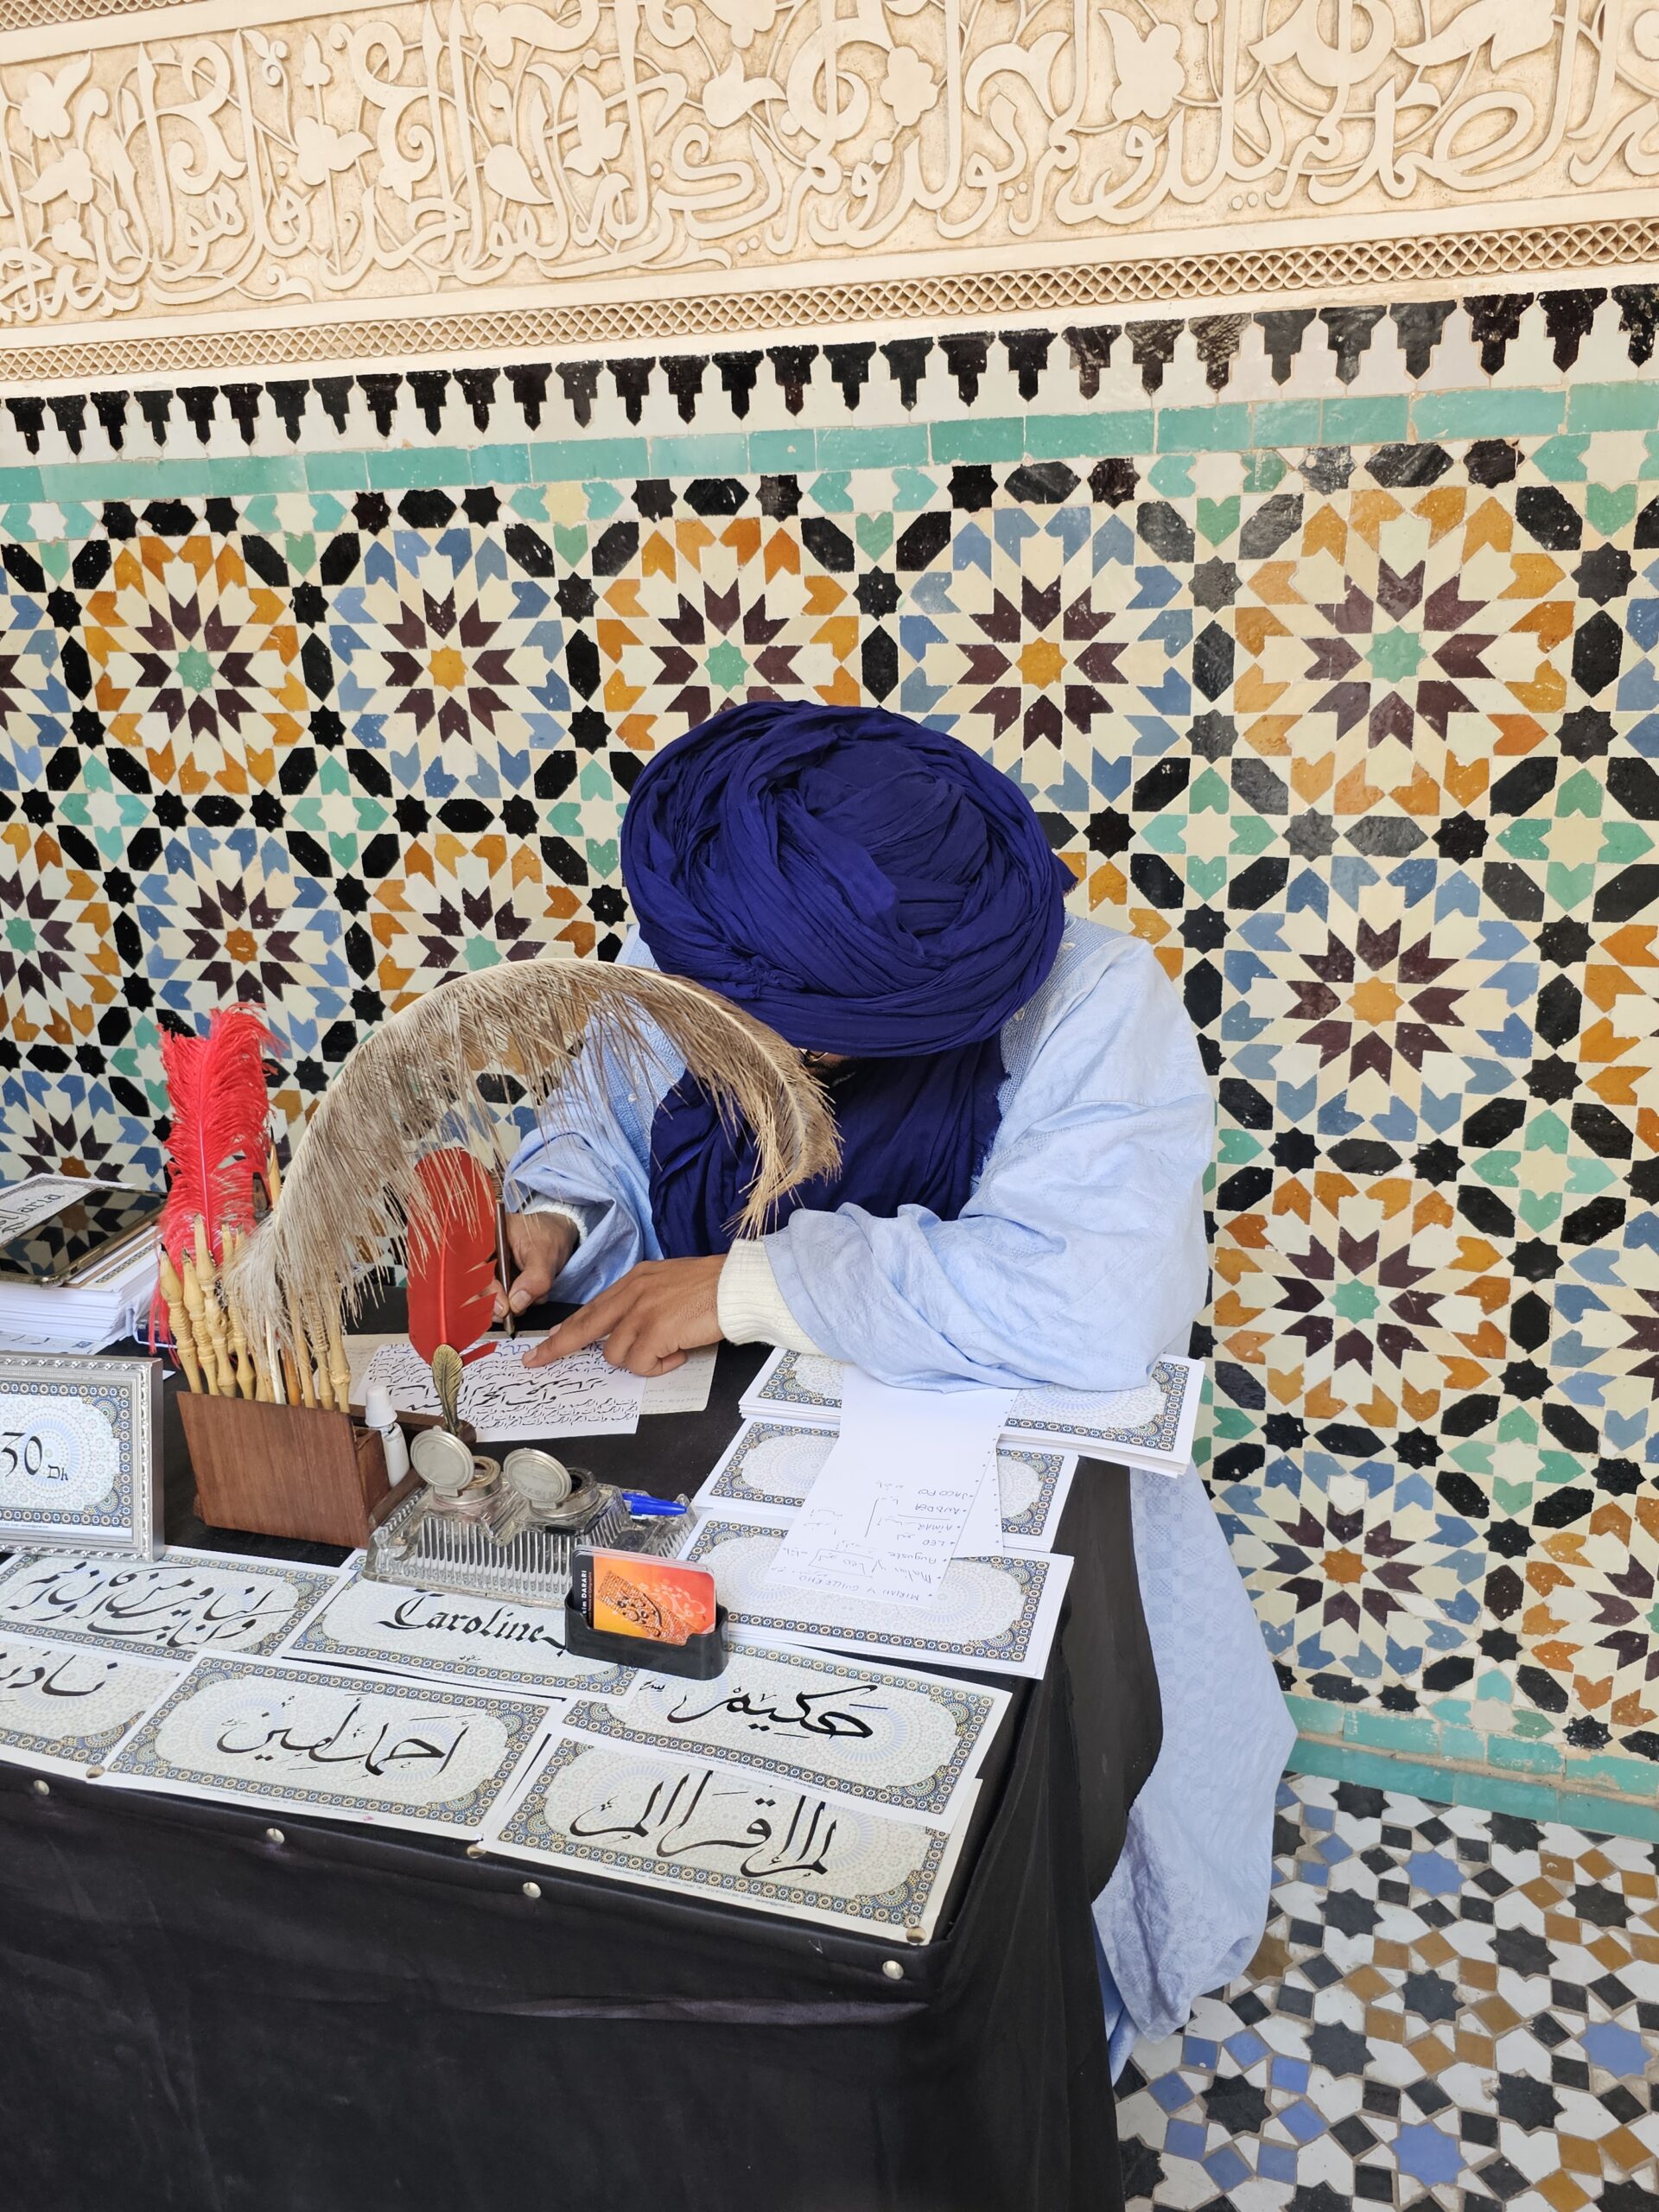 A khateeb (scribe) in a blue turban and white clothes sitting at a table and doing calligraphy. Image by 360